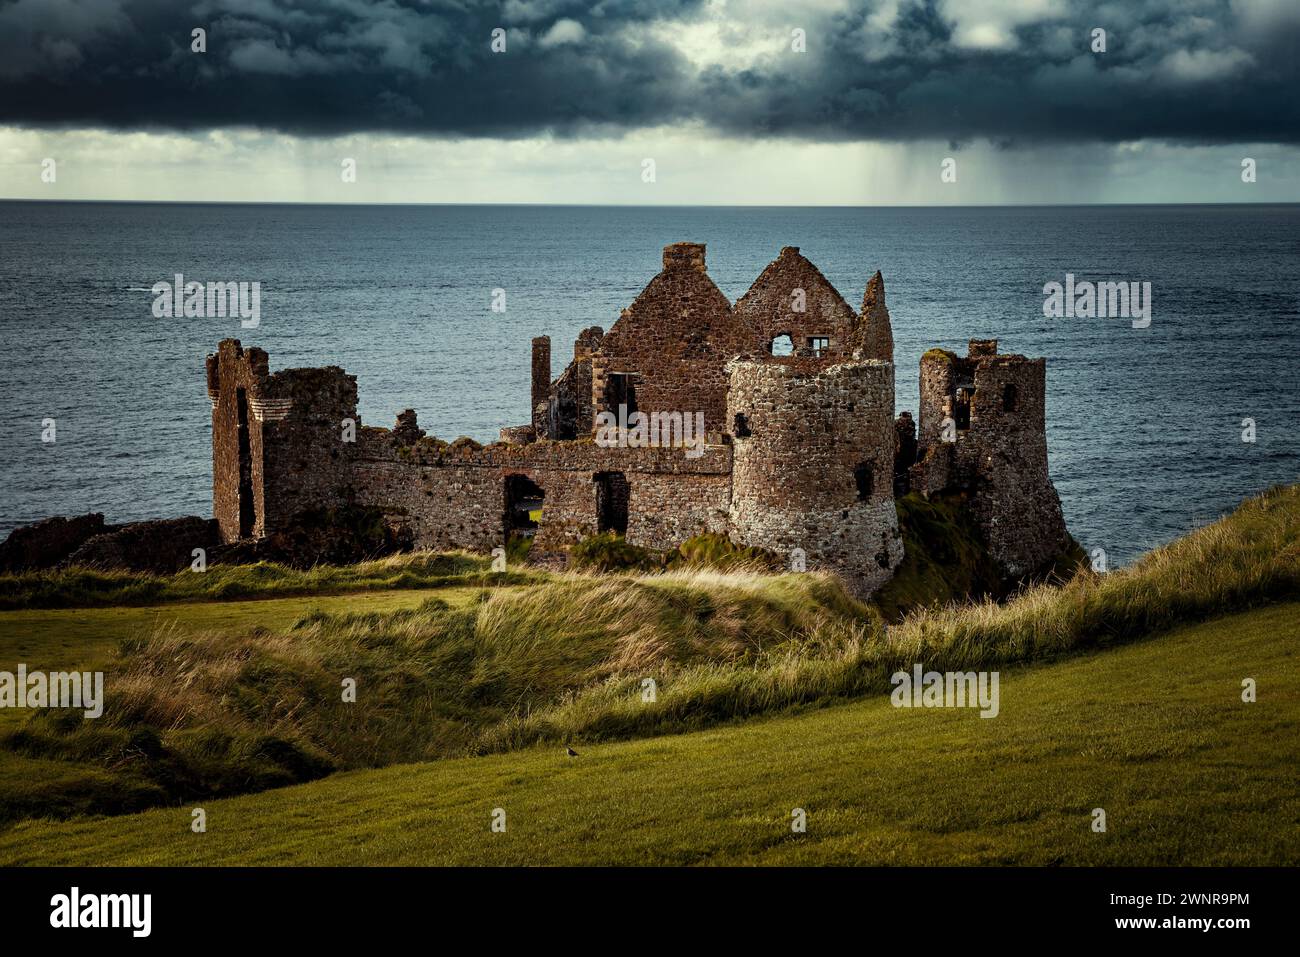 Dunluce Castle, ruined medieval castle in Northern Ireland,  a symbol of Irish Heritage and Culture Stock Photo